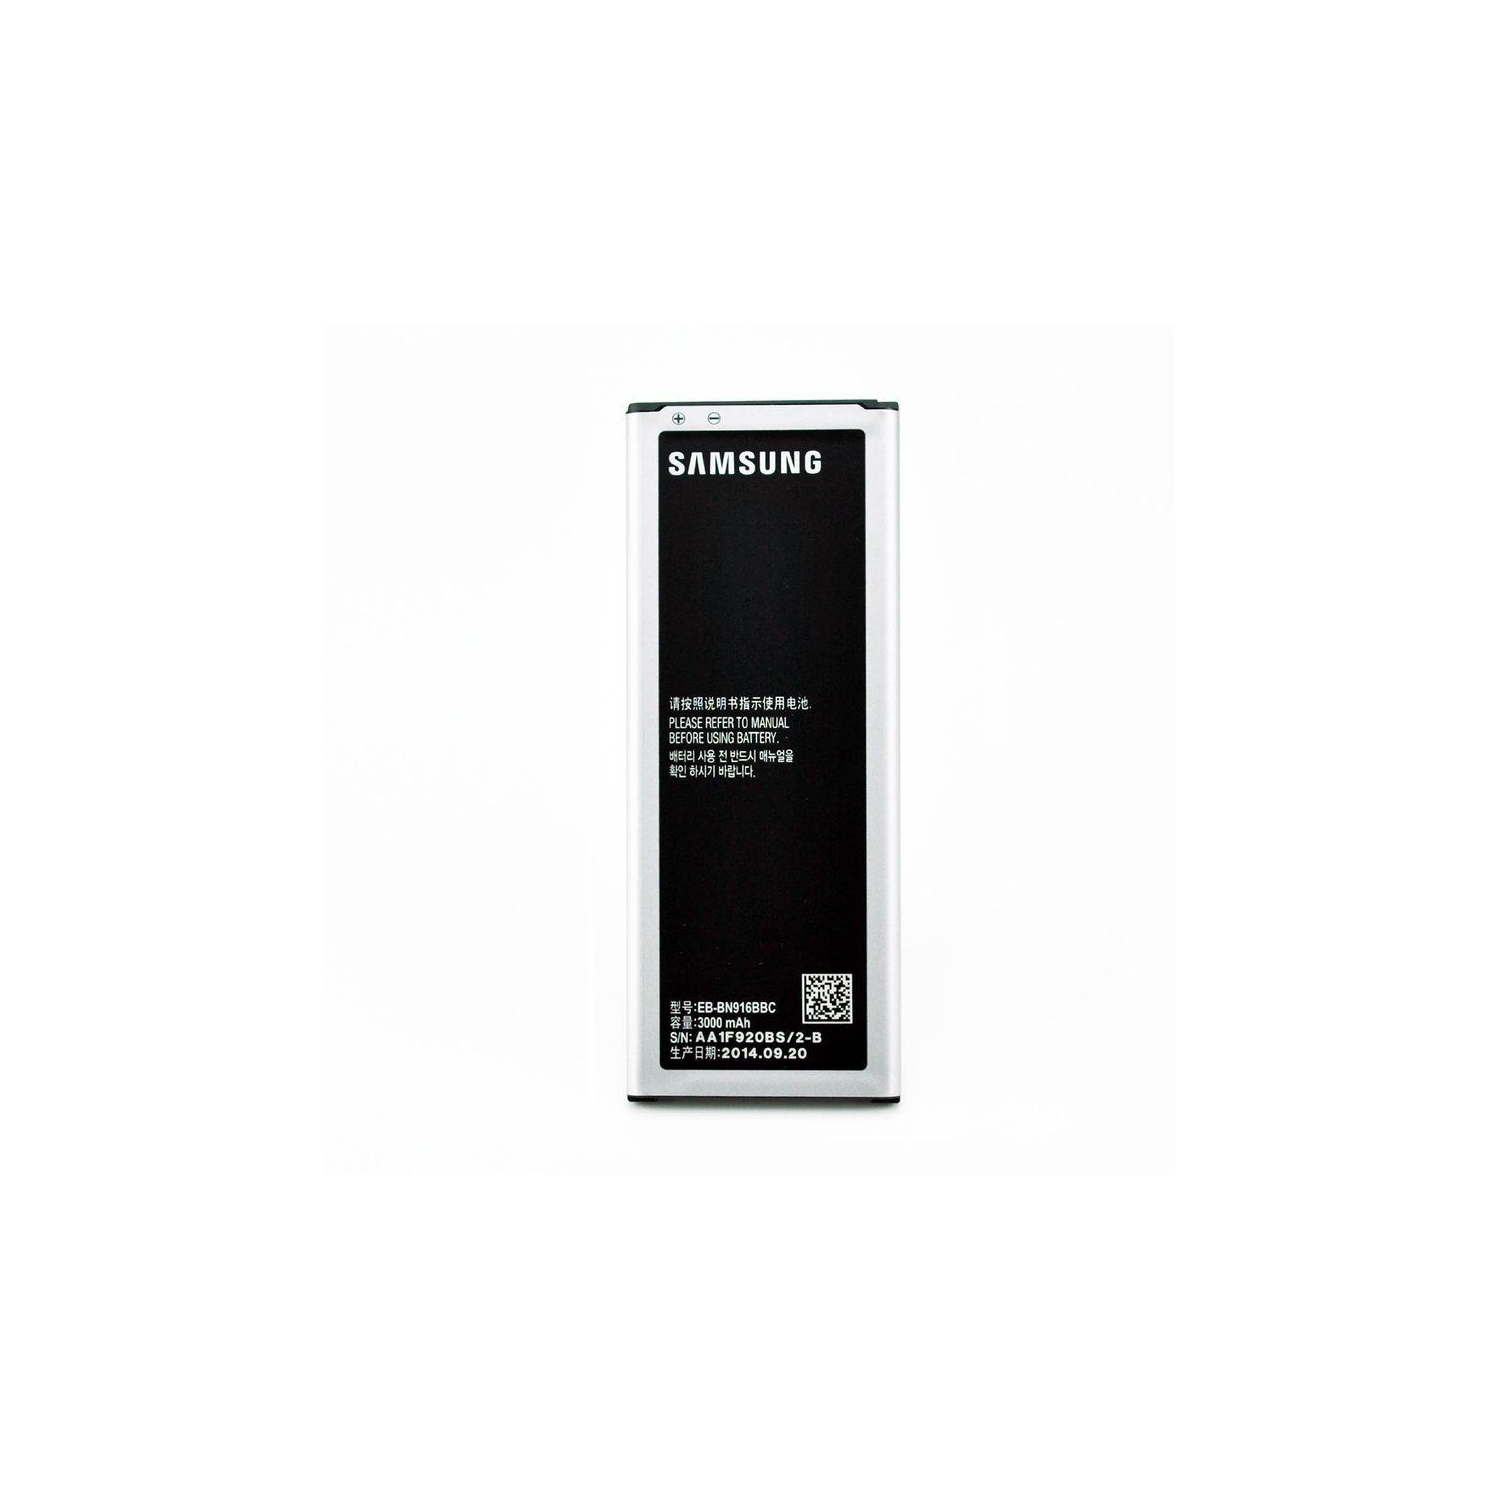 Samsung Galaxy Note 4 Duos (Dual Sim) Replacement Battery with NFC, N9106 EB-BN916BBC / EB-BN916BBE